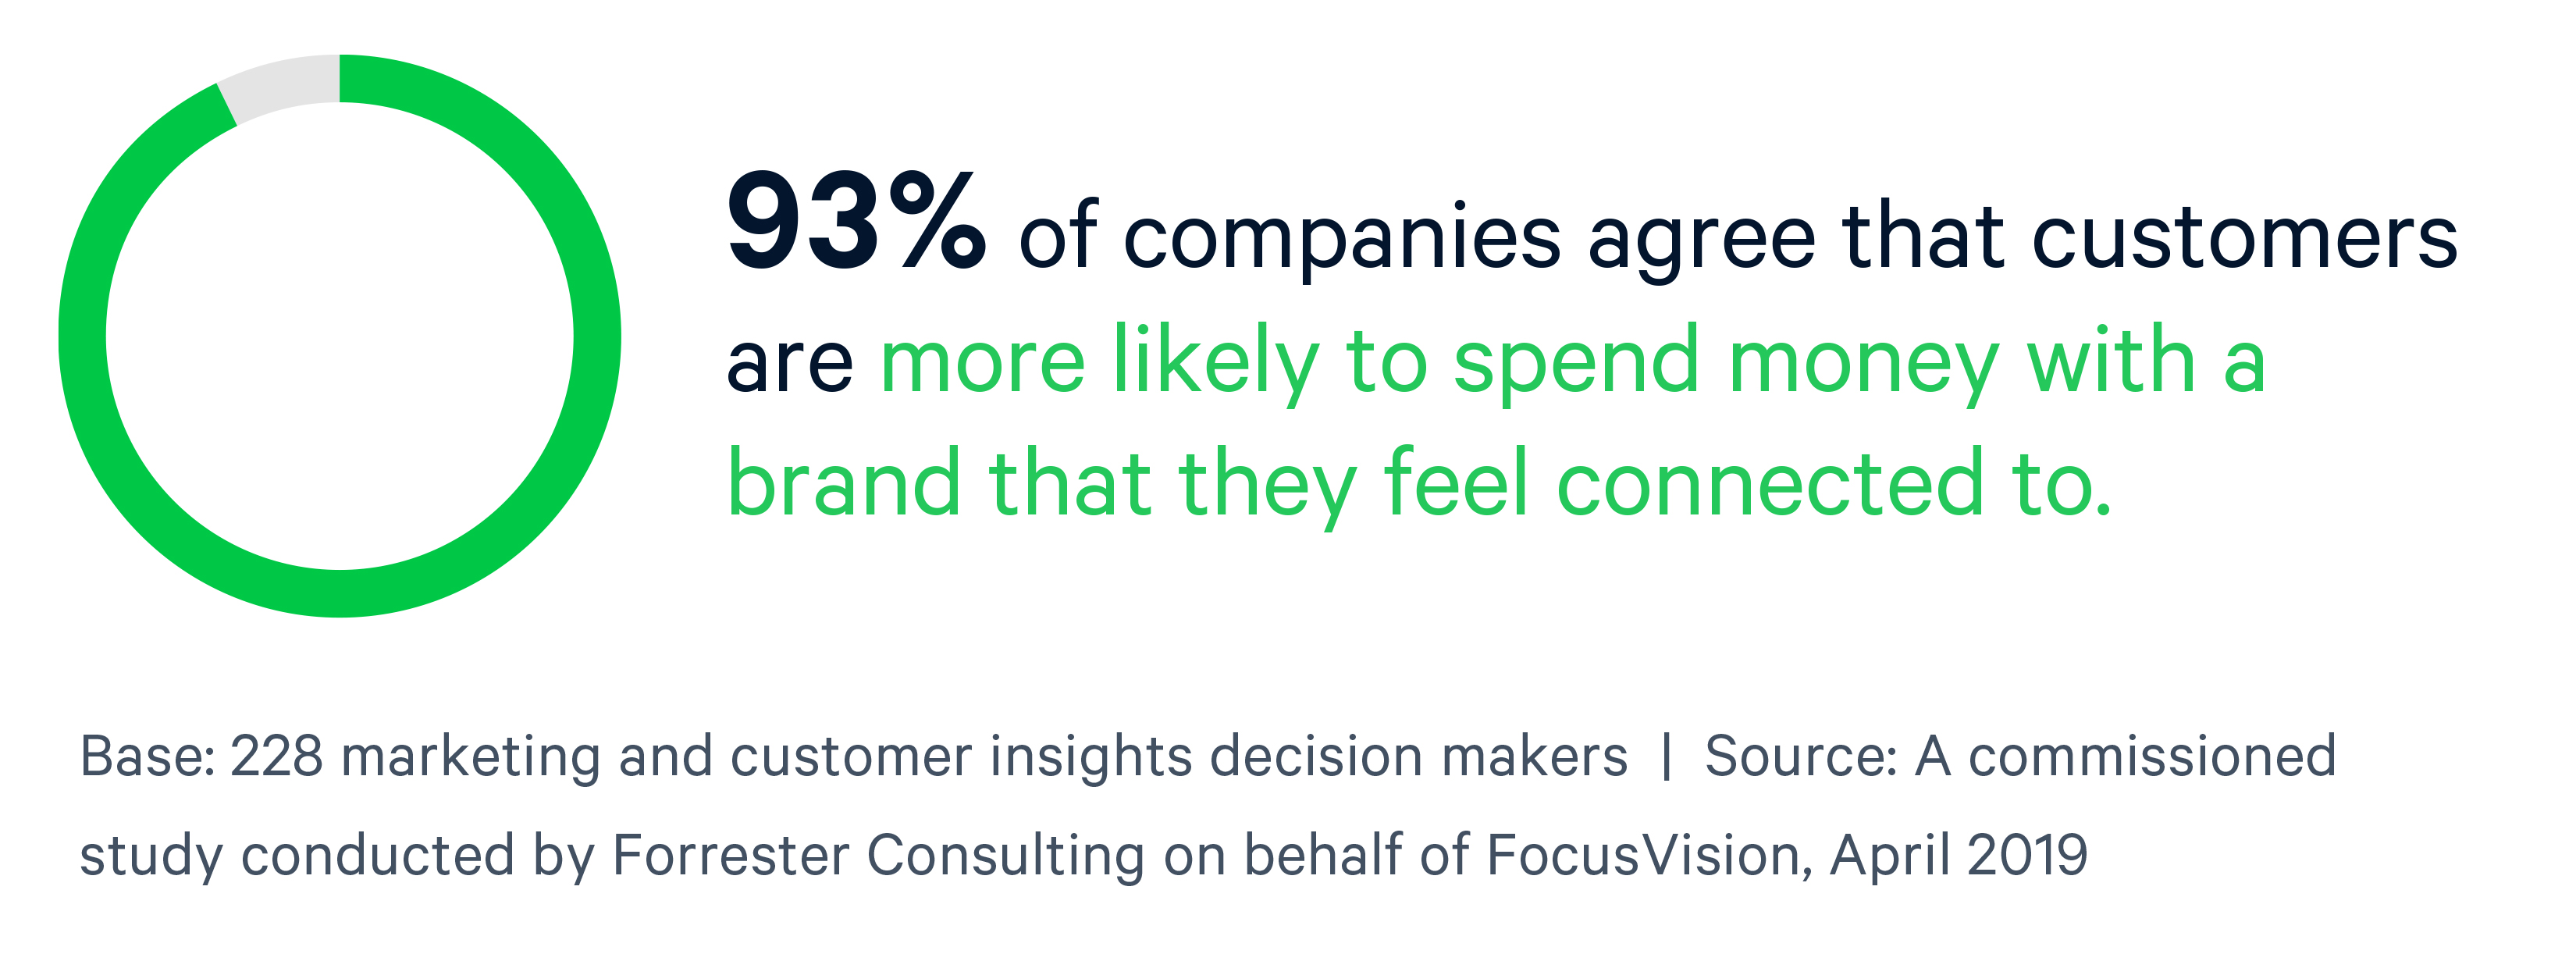 93% of companies agree that consumers are more likely to spend money with a brand that they feel connected to